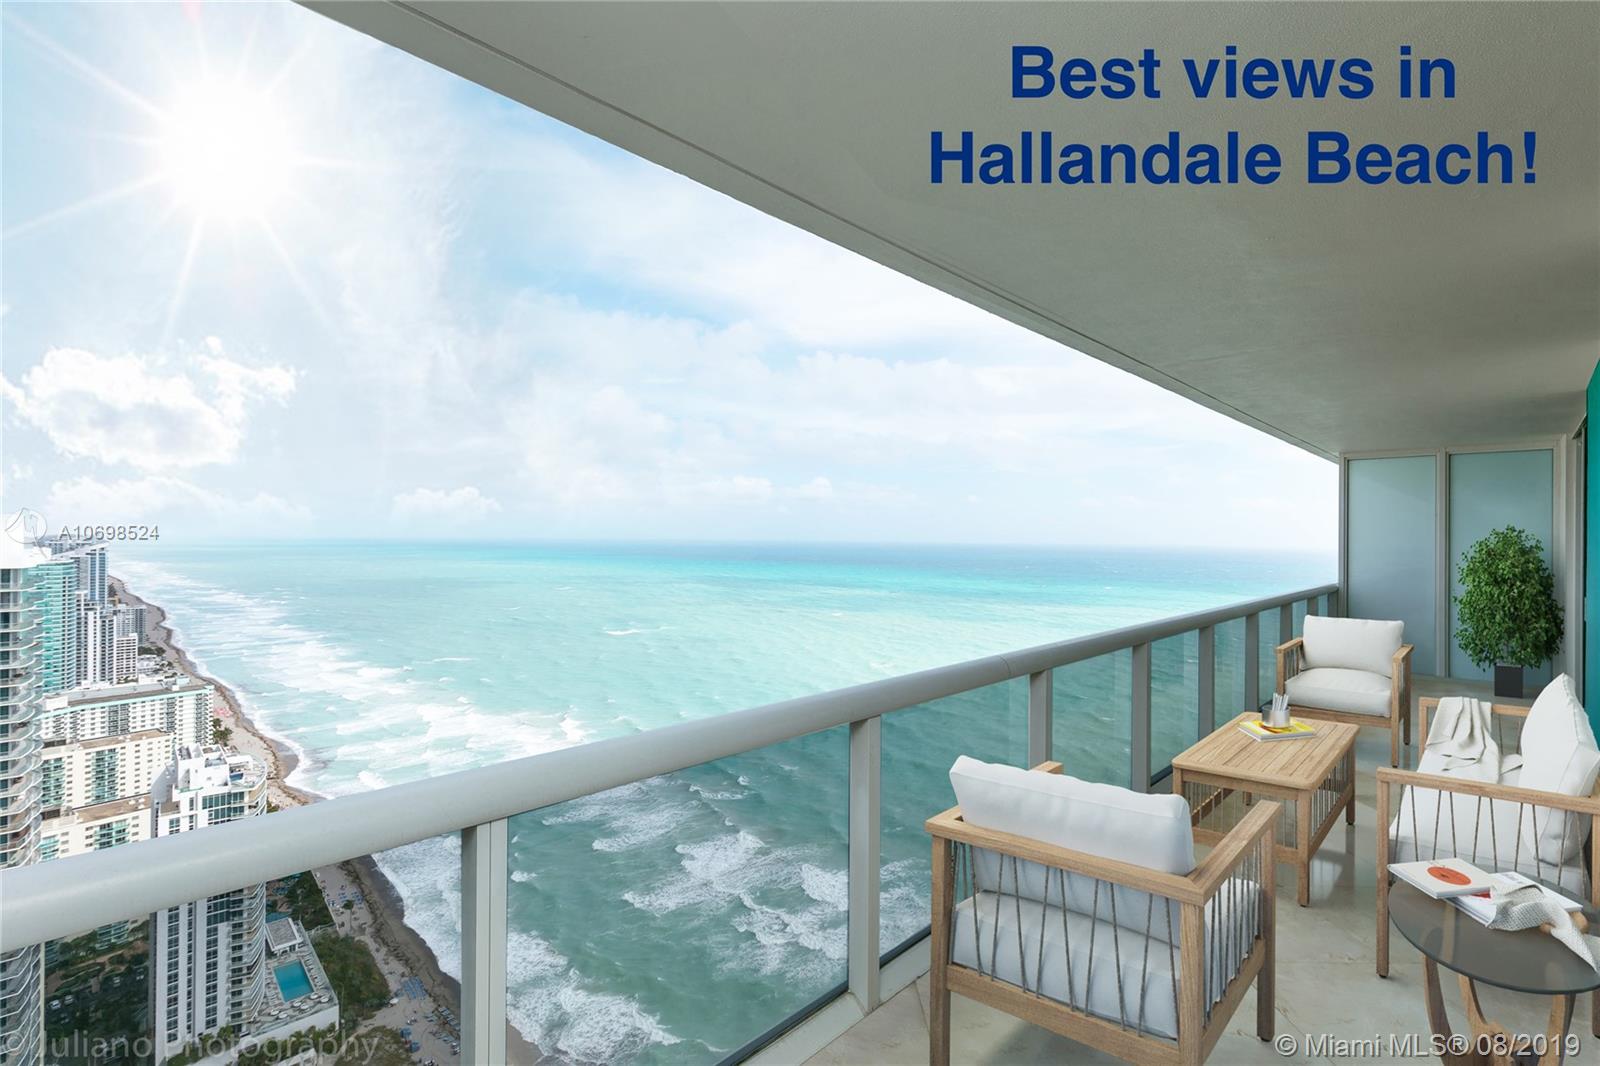 Live on top of the world and marvel at the never ending views of the Atlantic Ocean from this enormous balcony! Virtually staged